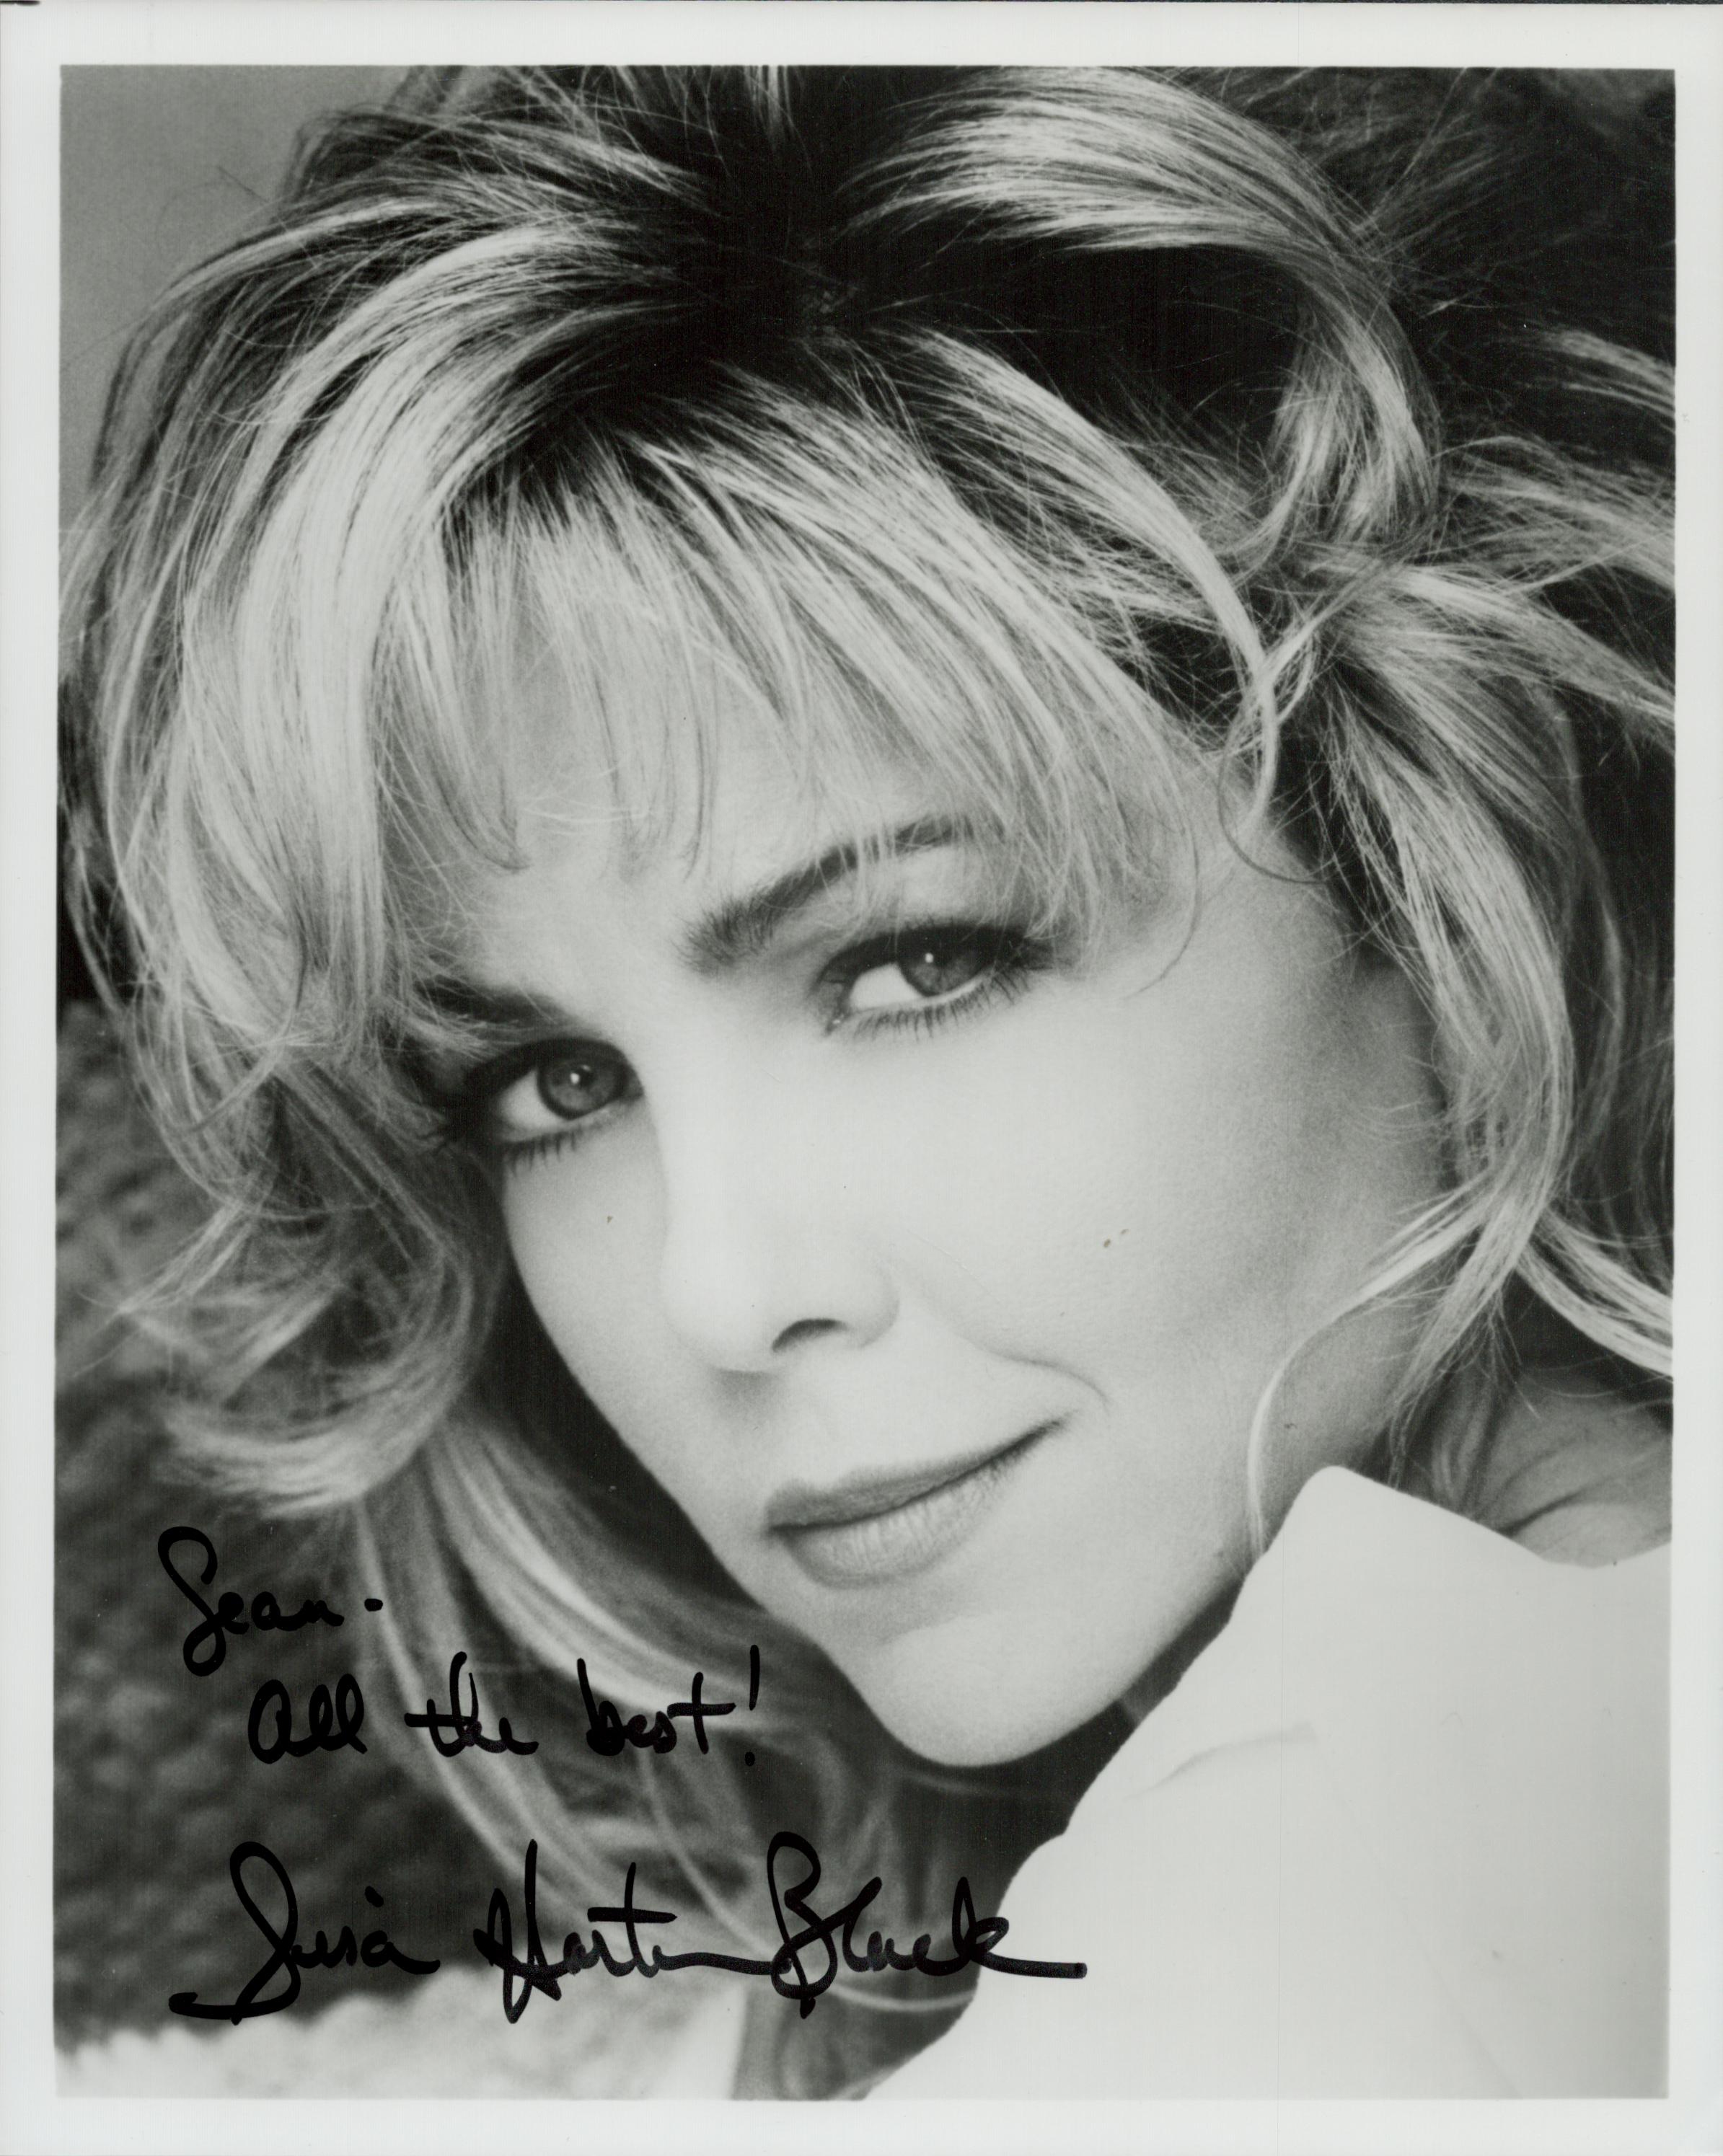 Lisa Hartman Black signed 10x8 inch black and white photo. Good condition. All autographs come